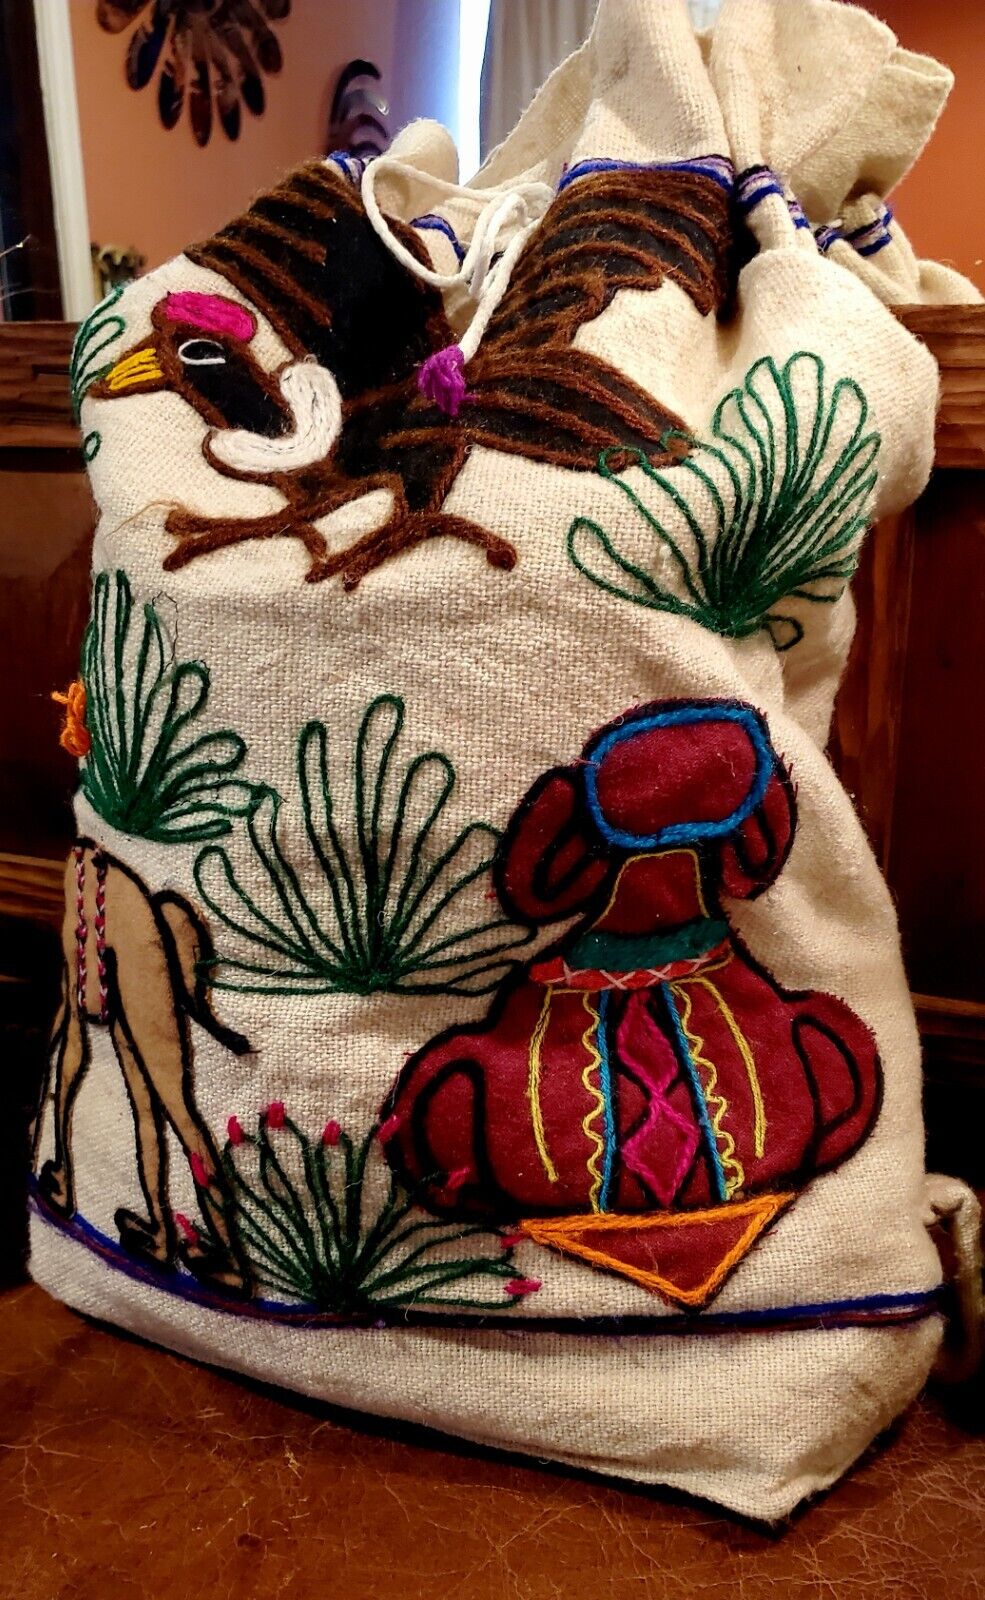 Rustic Backpack Andes Colorful Textile, The rustic chic